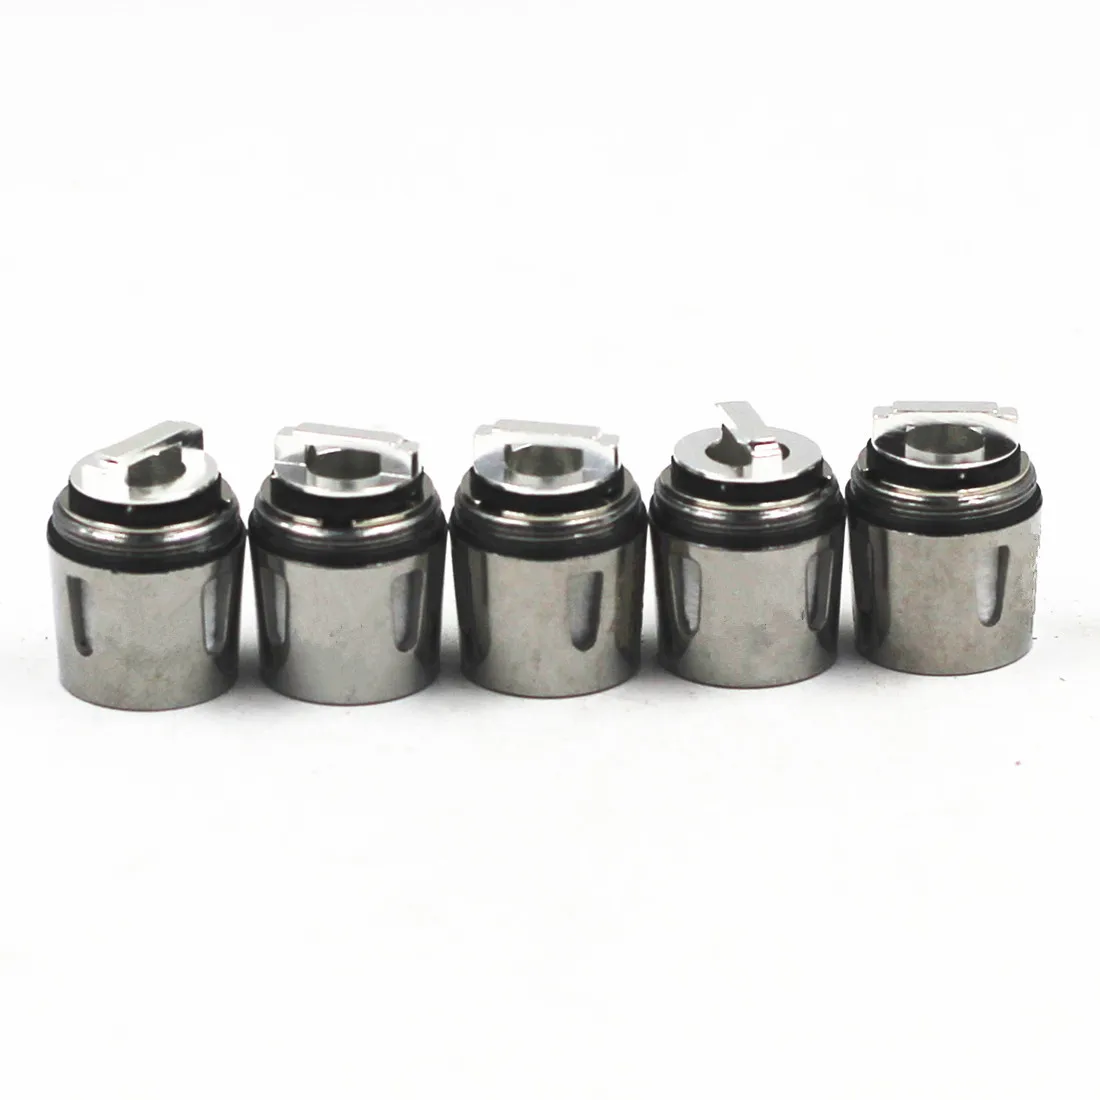 

5pcs V8 Baby Q2 0.4ohm Replacement Coil head for V8 Baby Sub-ohm Atomizer Tank